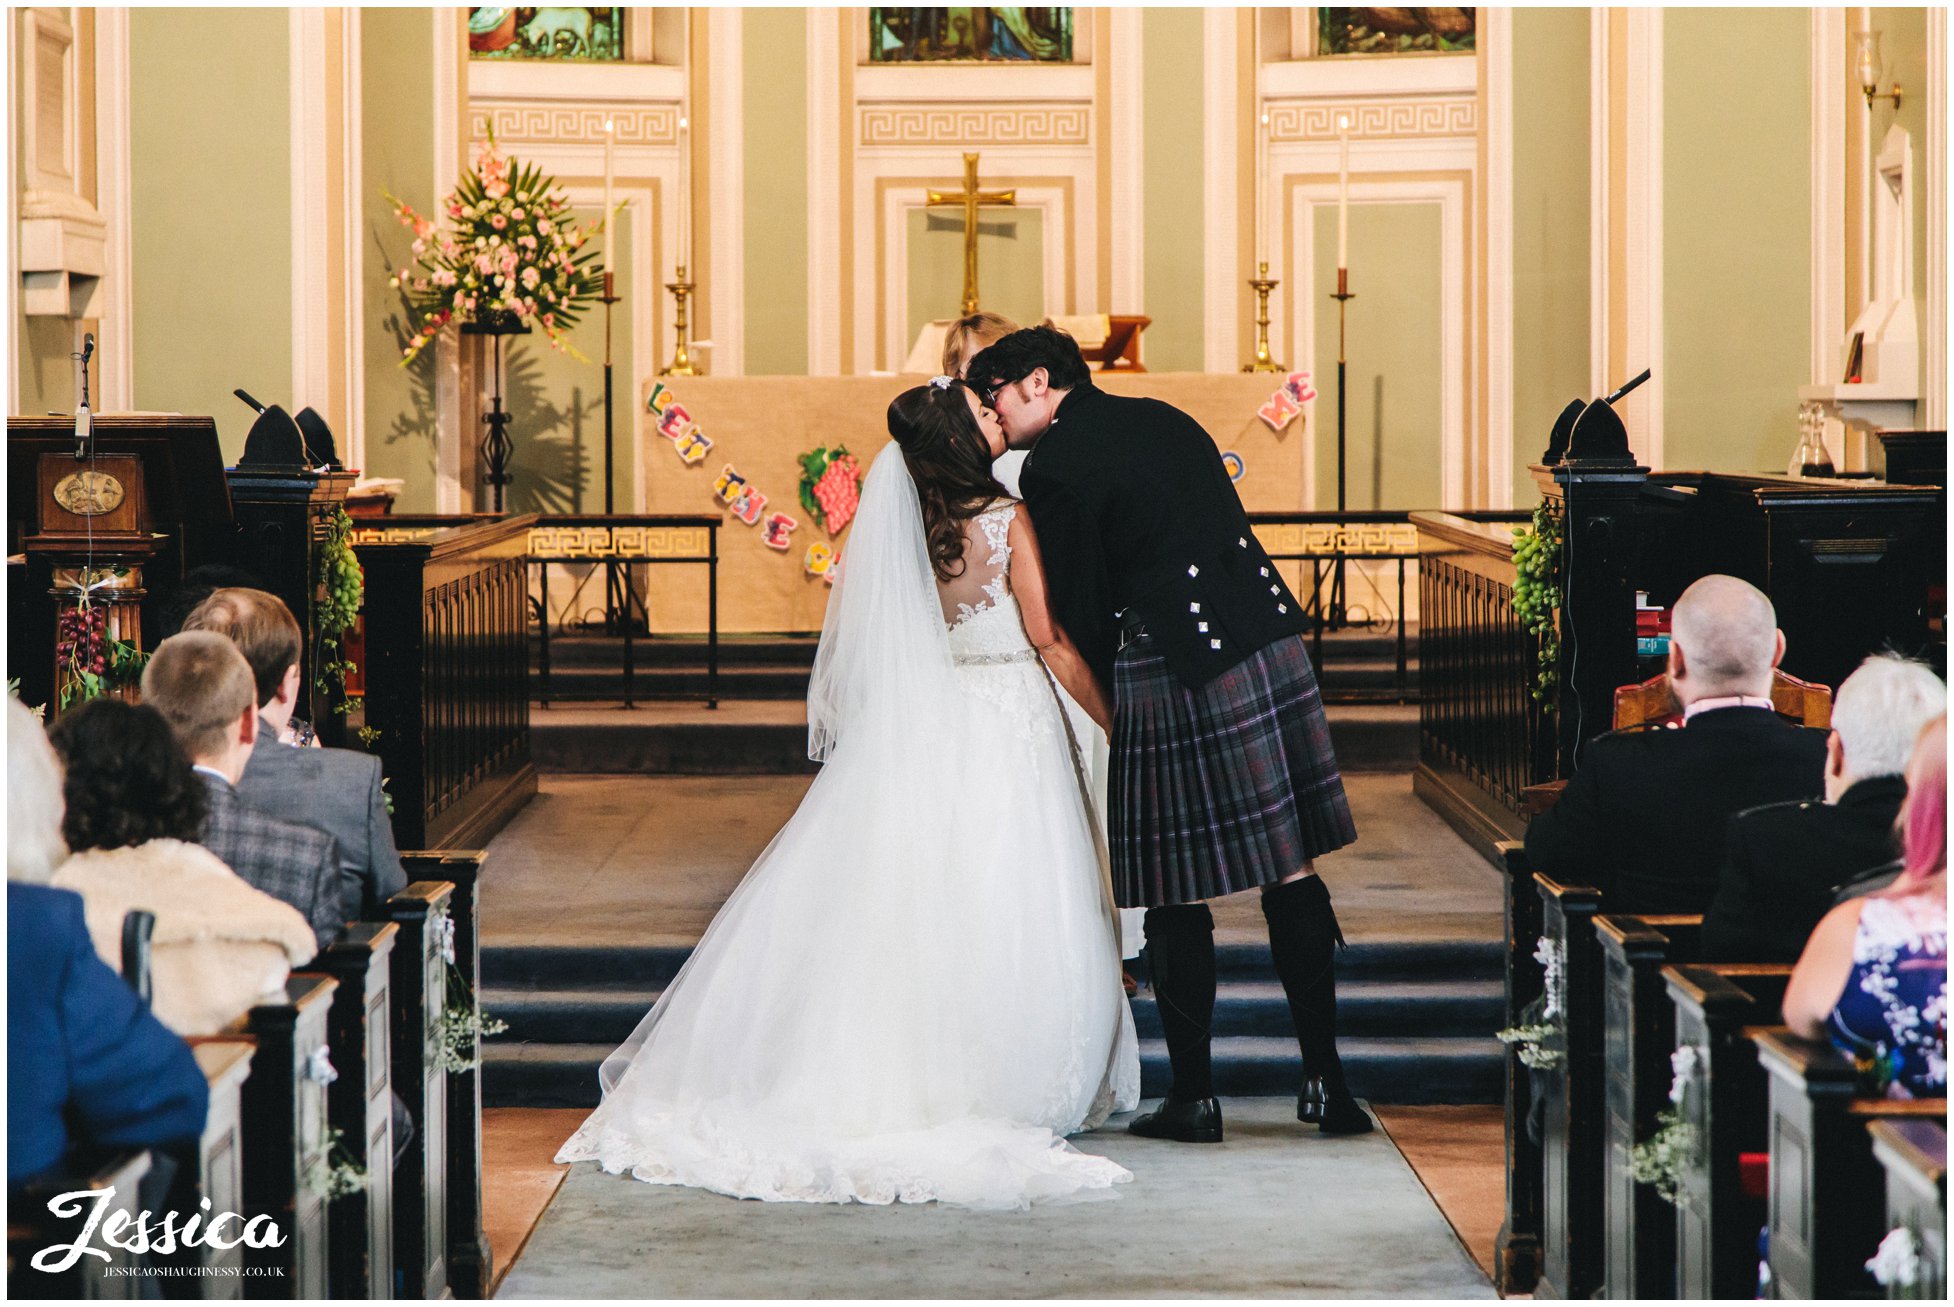 bride and groom share first kiss at the church alter